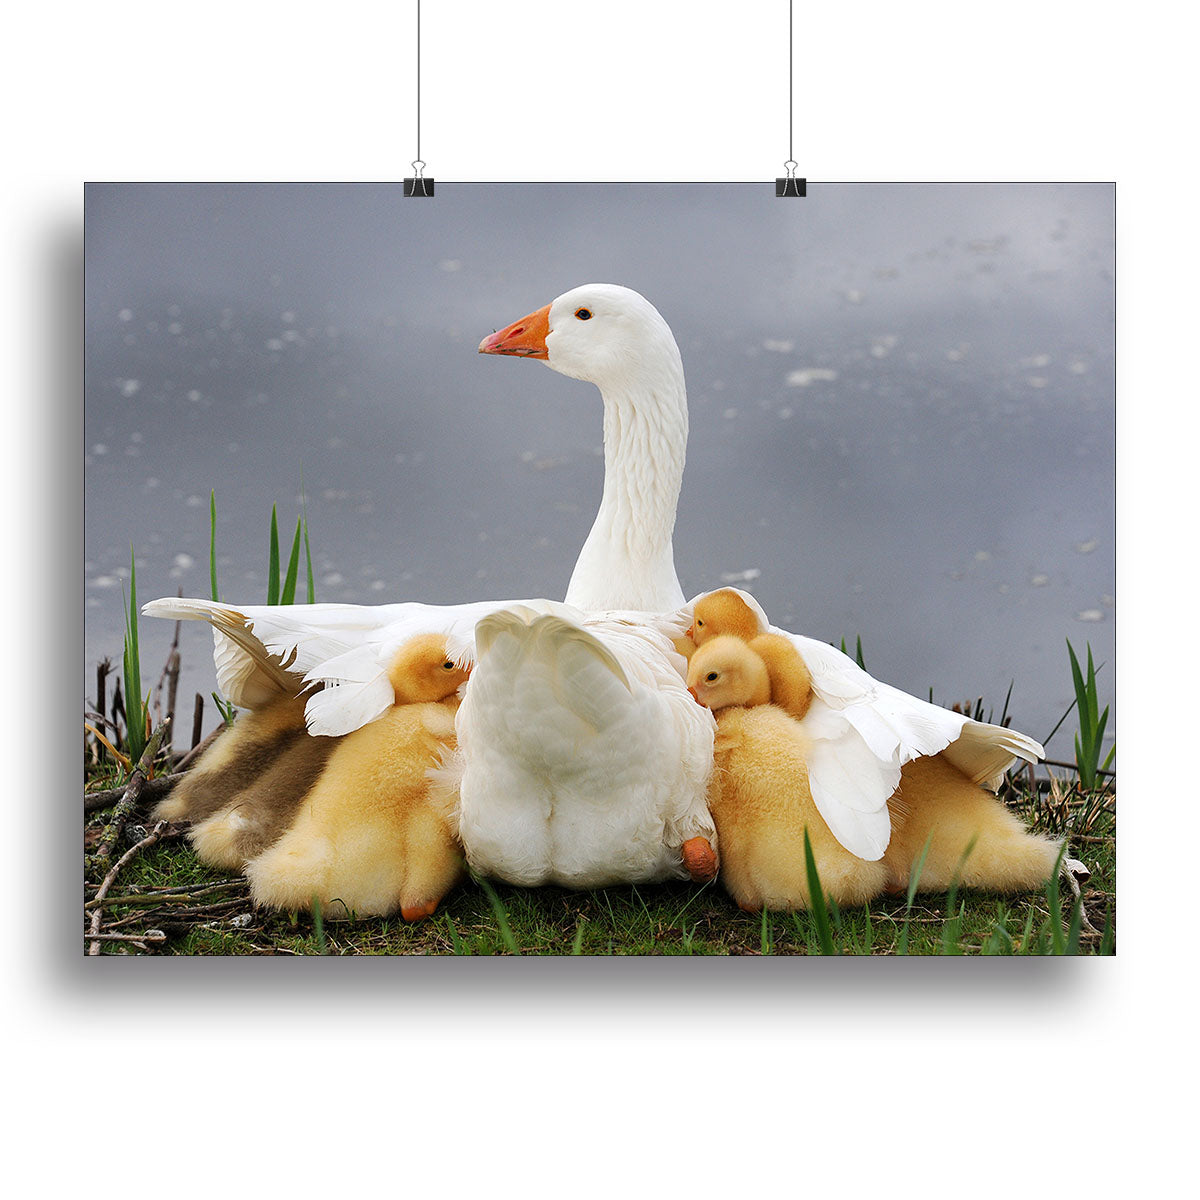 Mums protection Canvas Print or Poster - 1x - 2